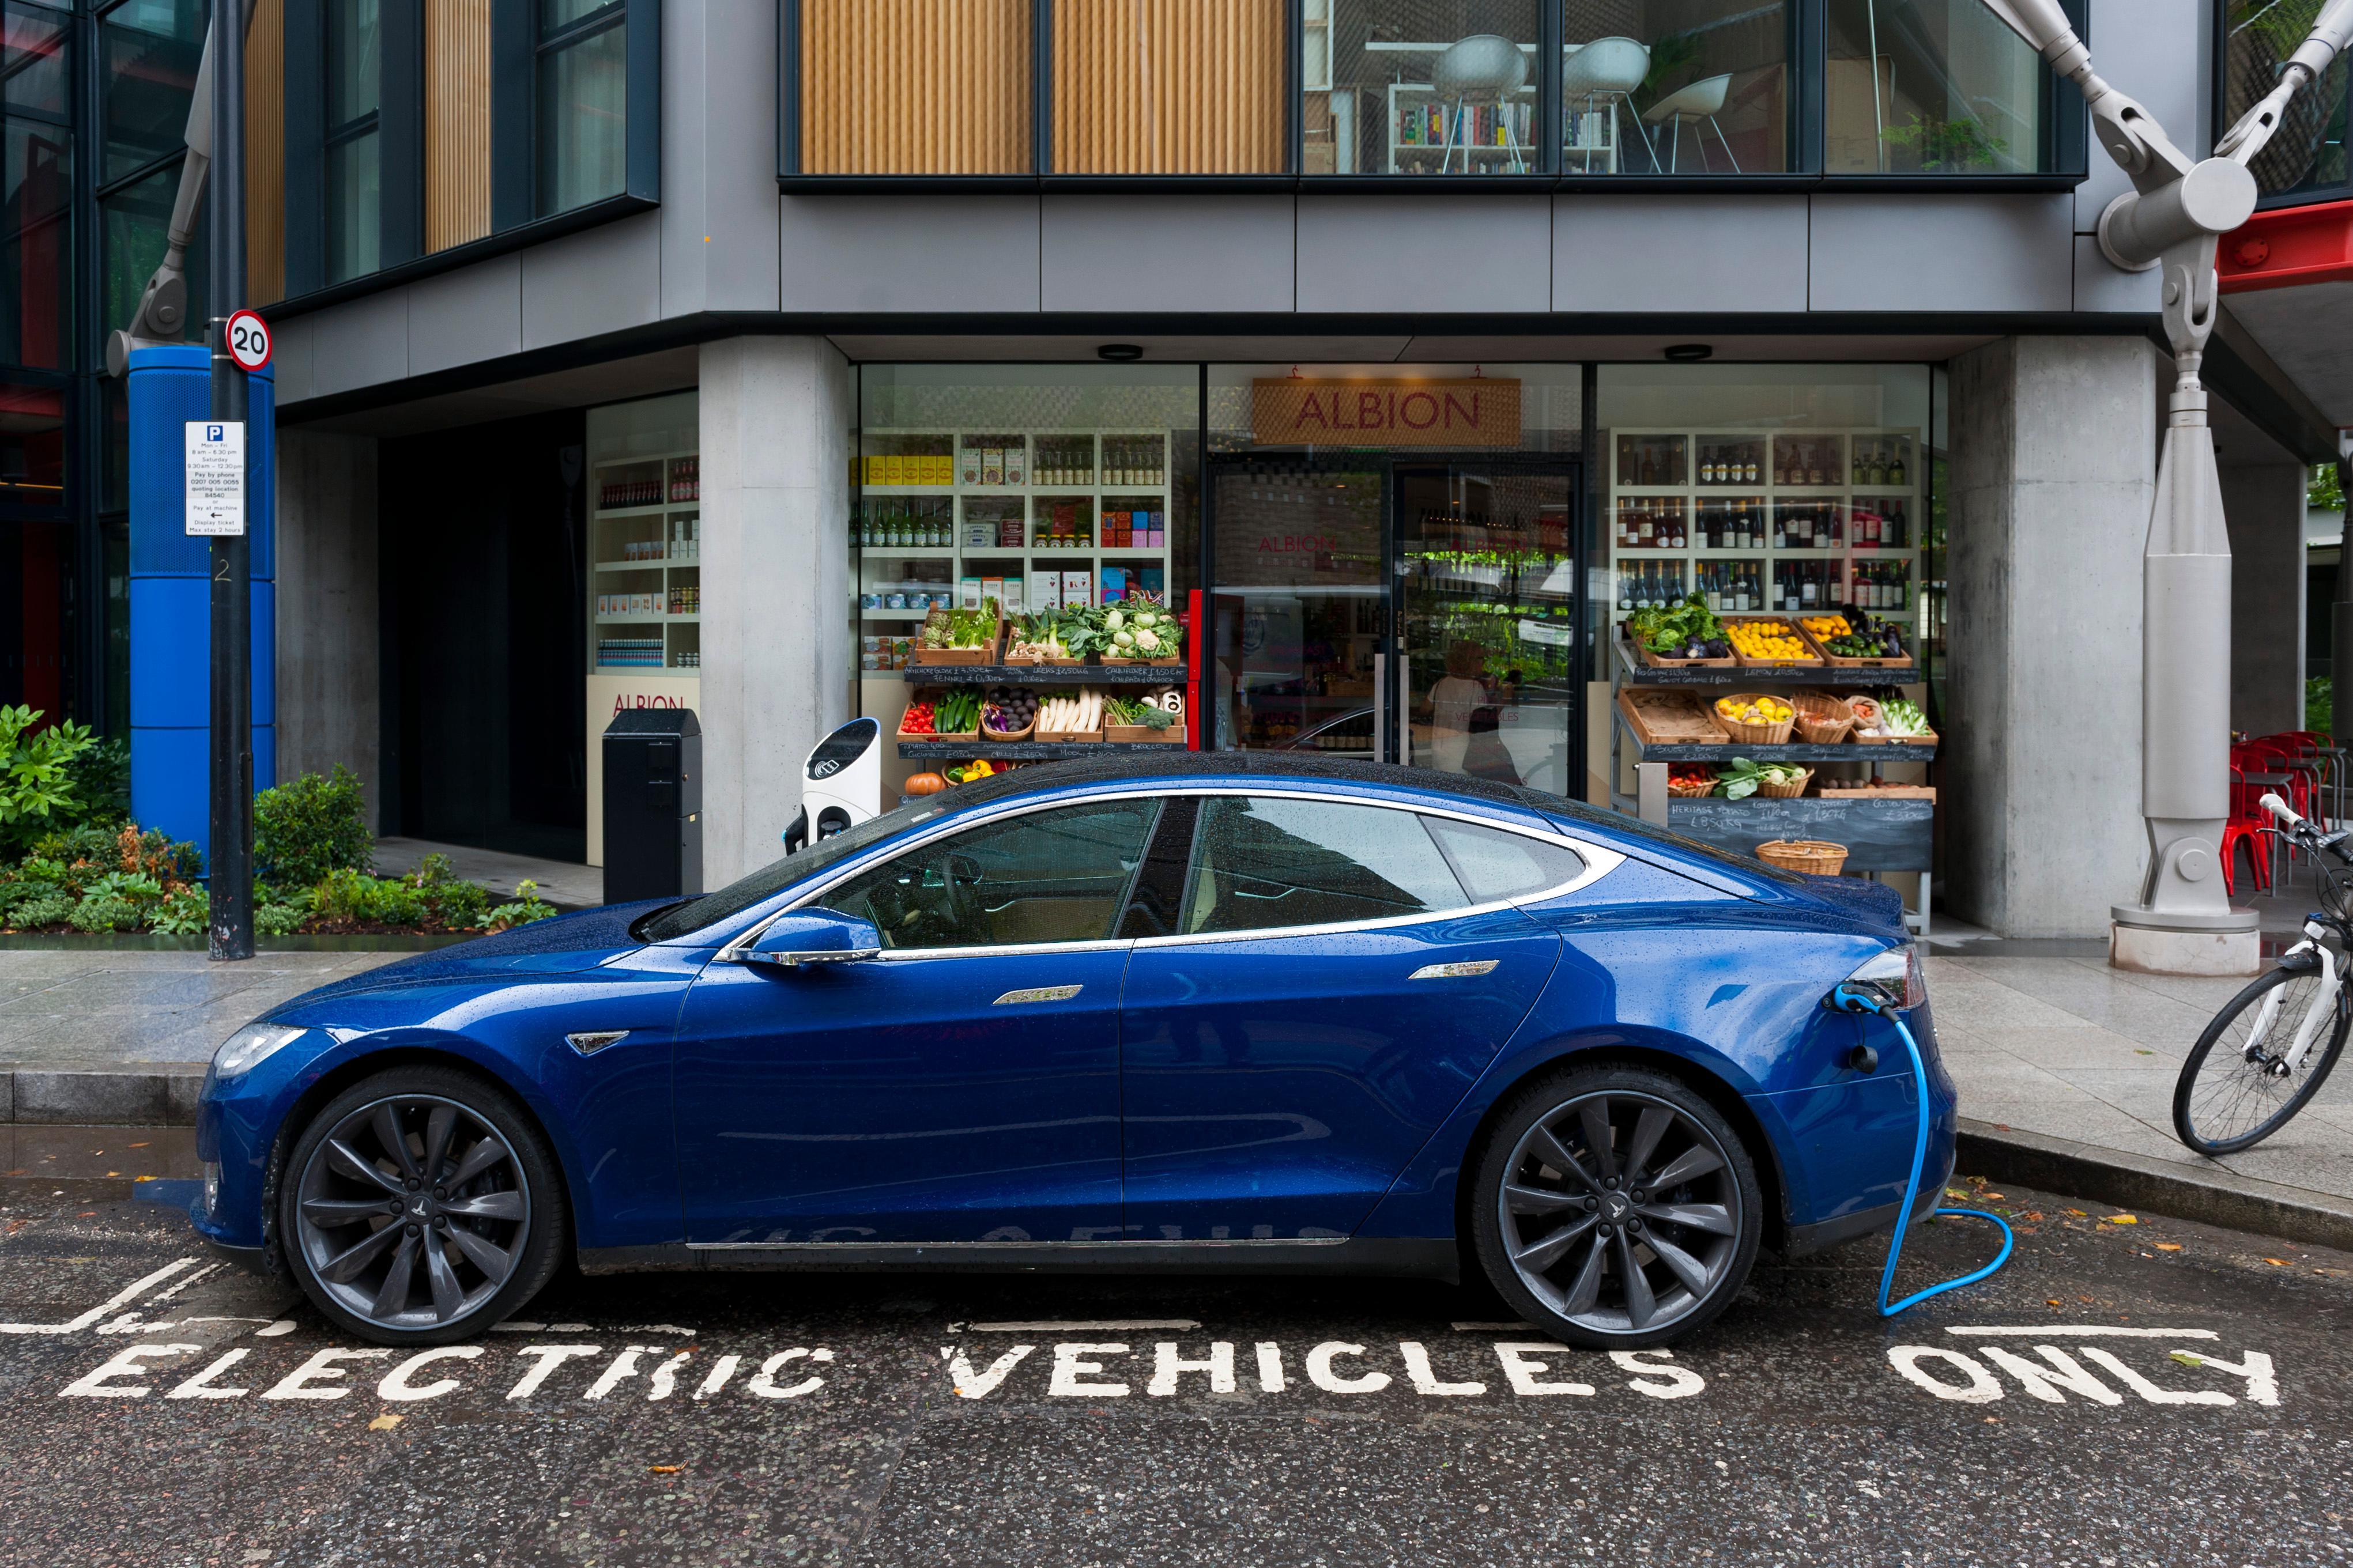 In UK, you may receive a company EV for personal use as a Benefit in Kind